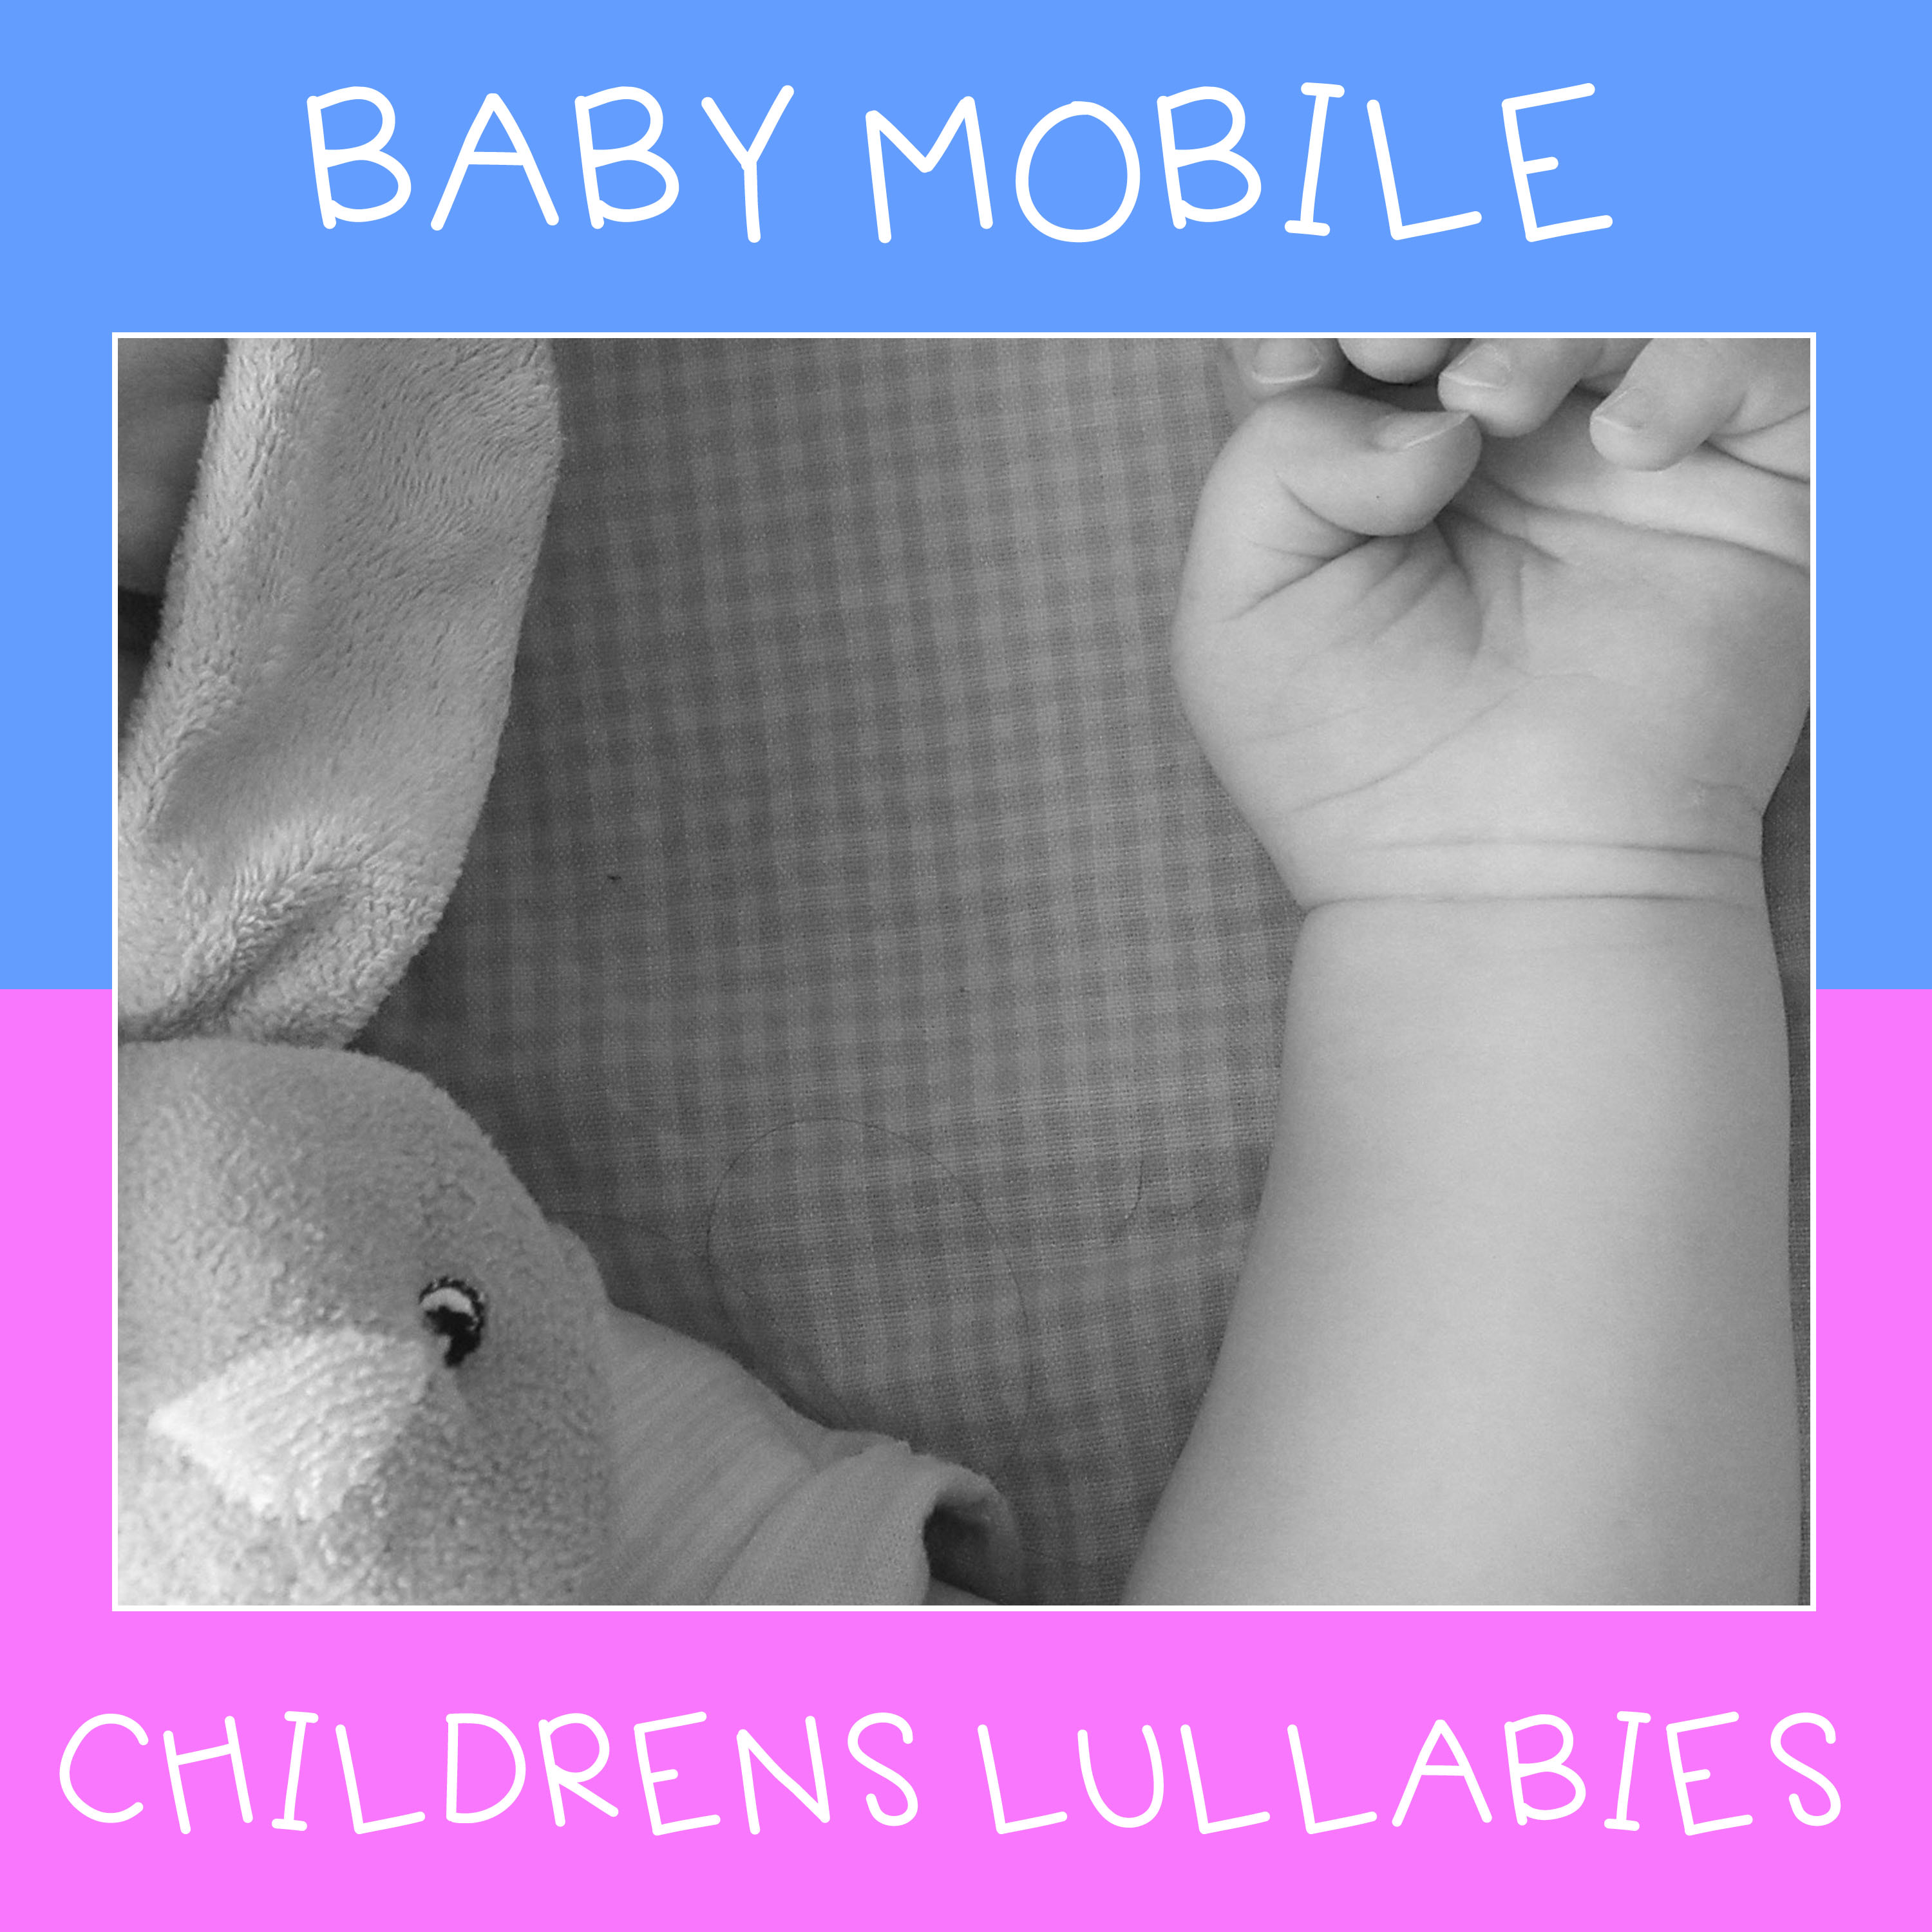 #5 Baby Mobile Childrens Lullabies